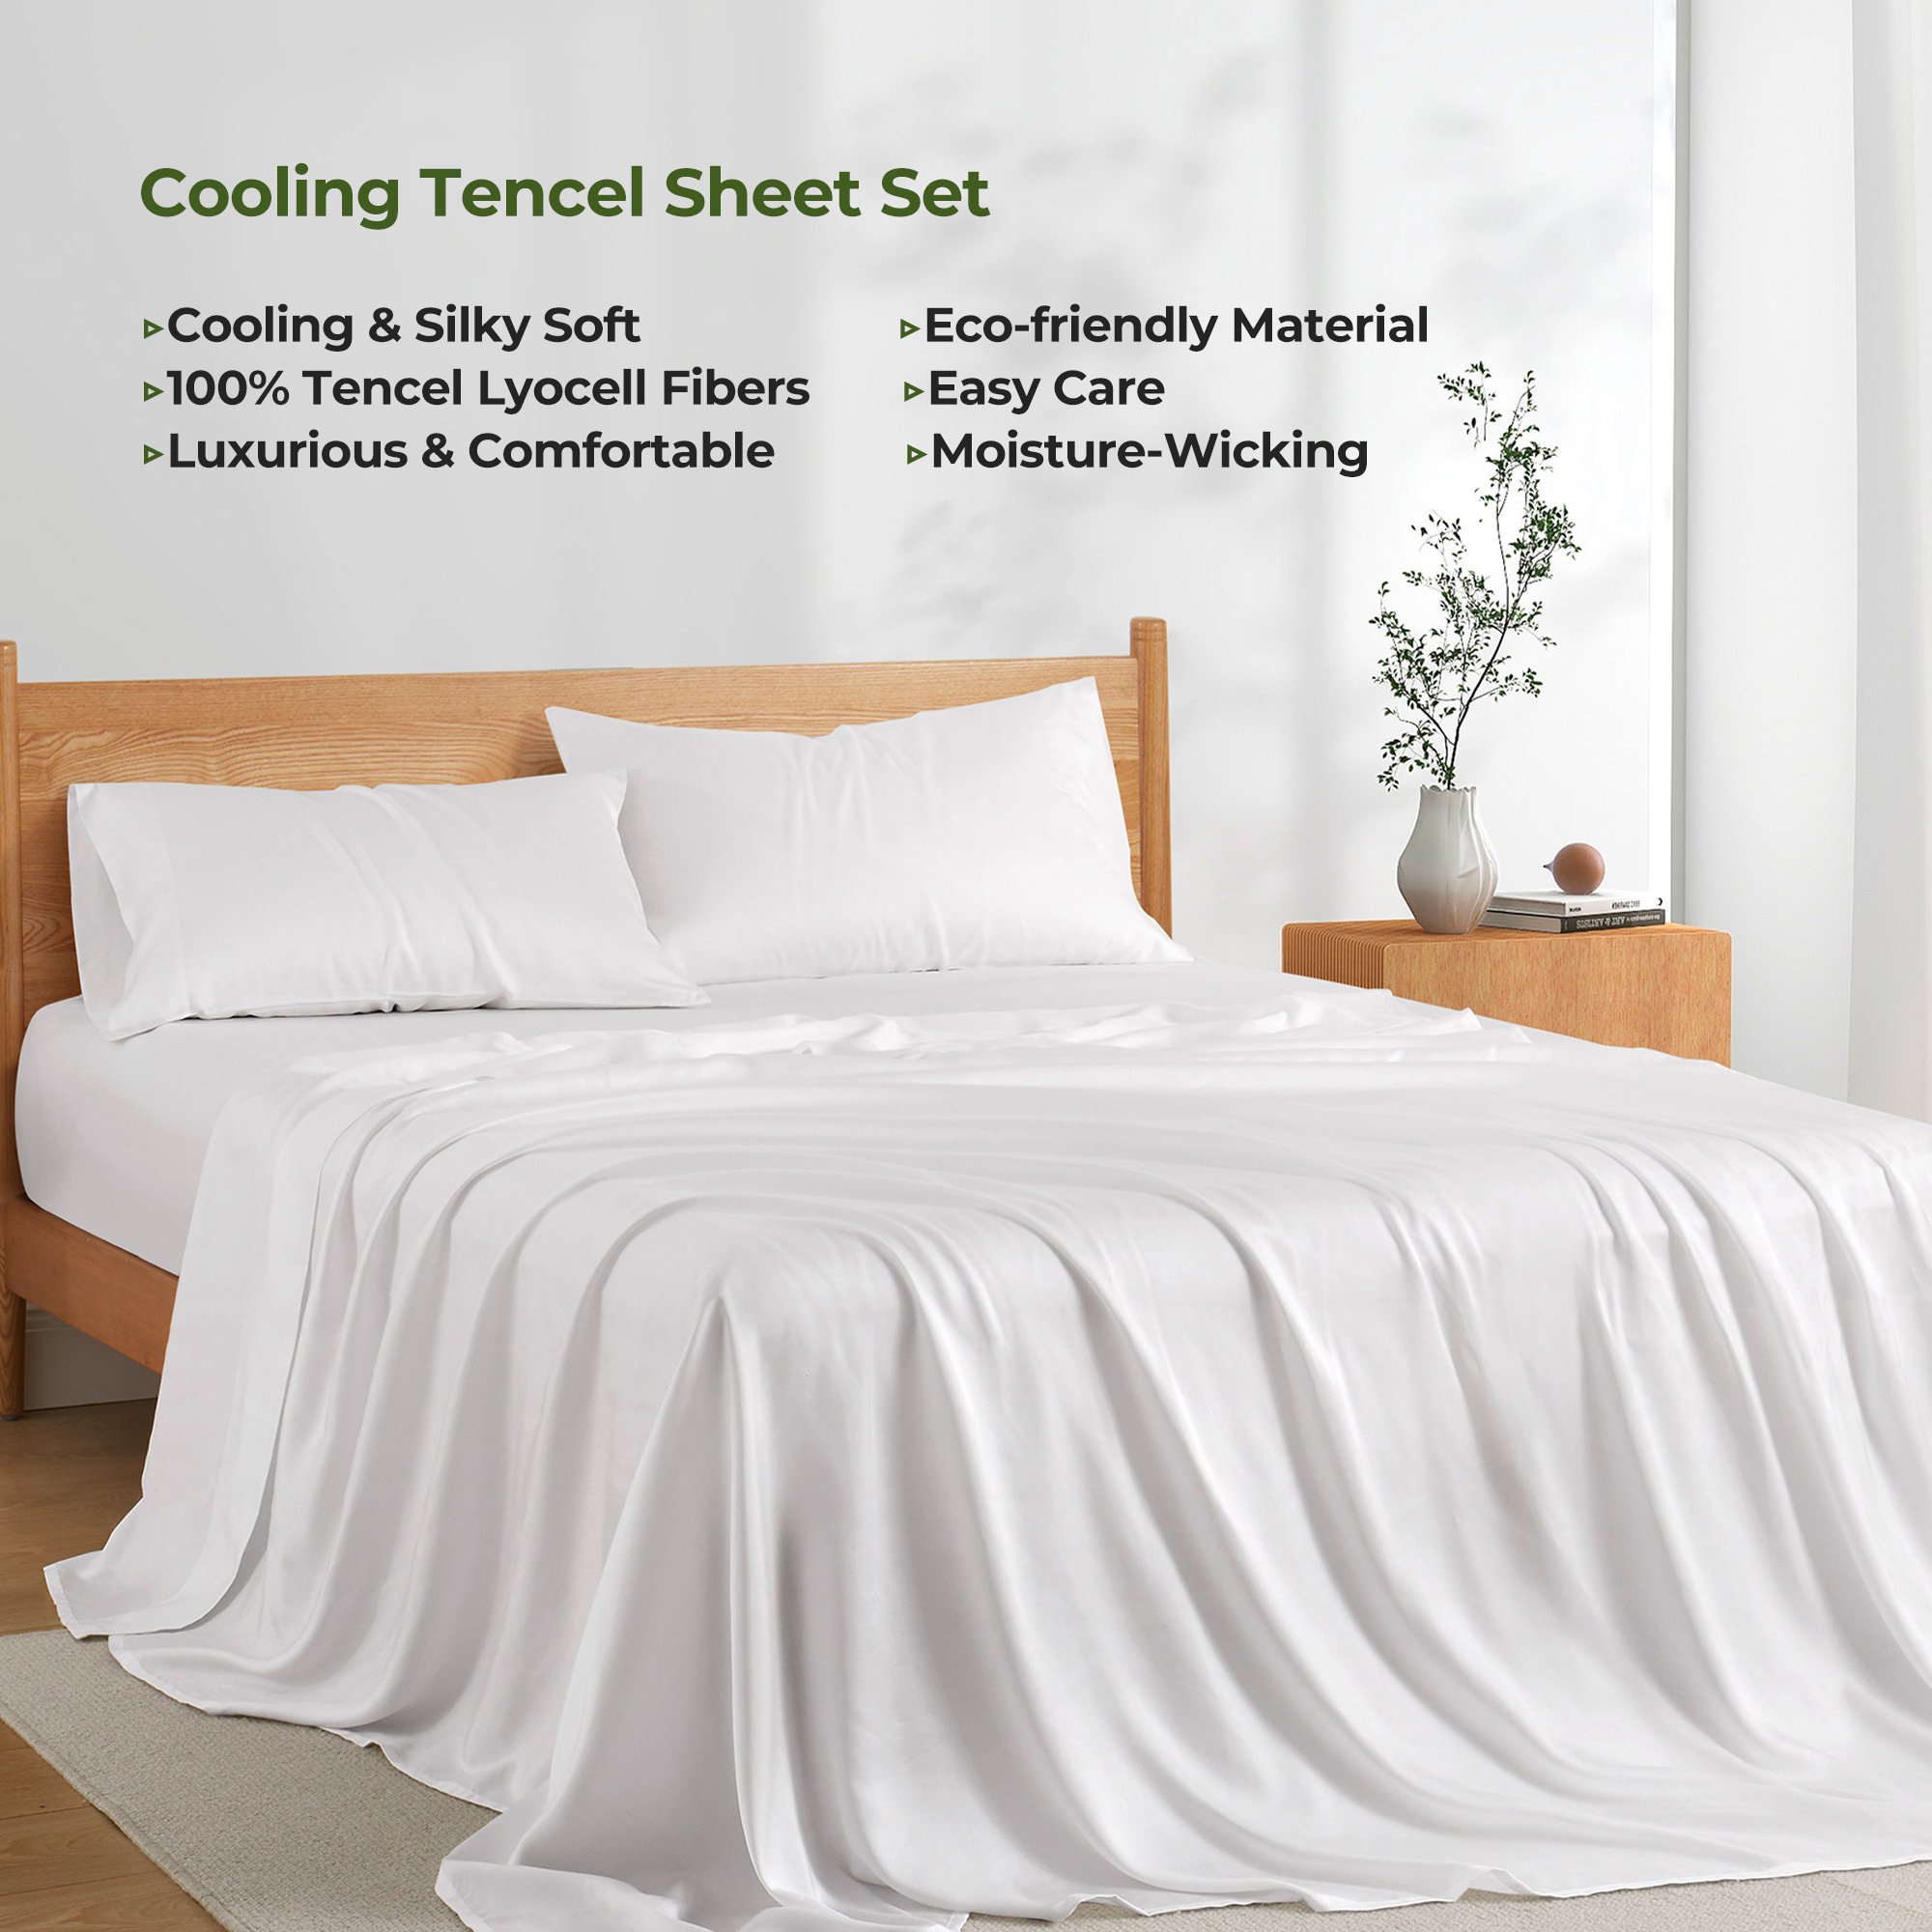 Tencel Lyocell 4Pc Sheets Set, Softest & Cooling-Deep Pocket Bottom Bed Sheet, Large Top Sheet & Pillowcases - Queen Size